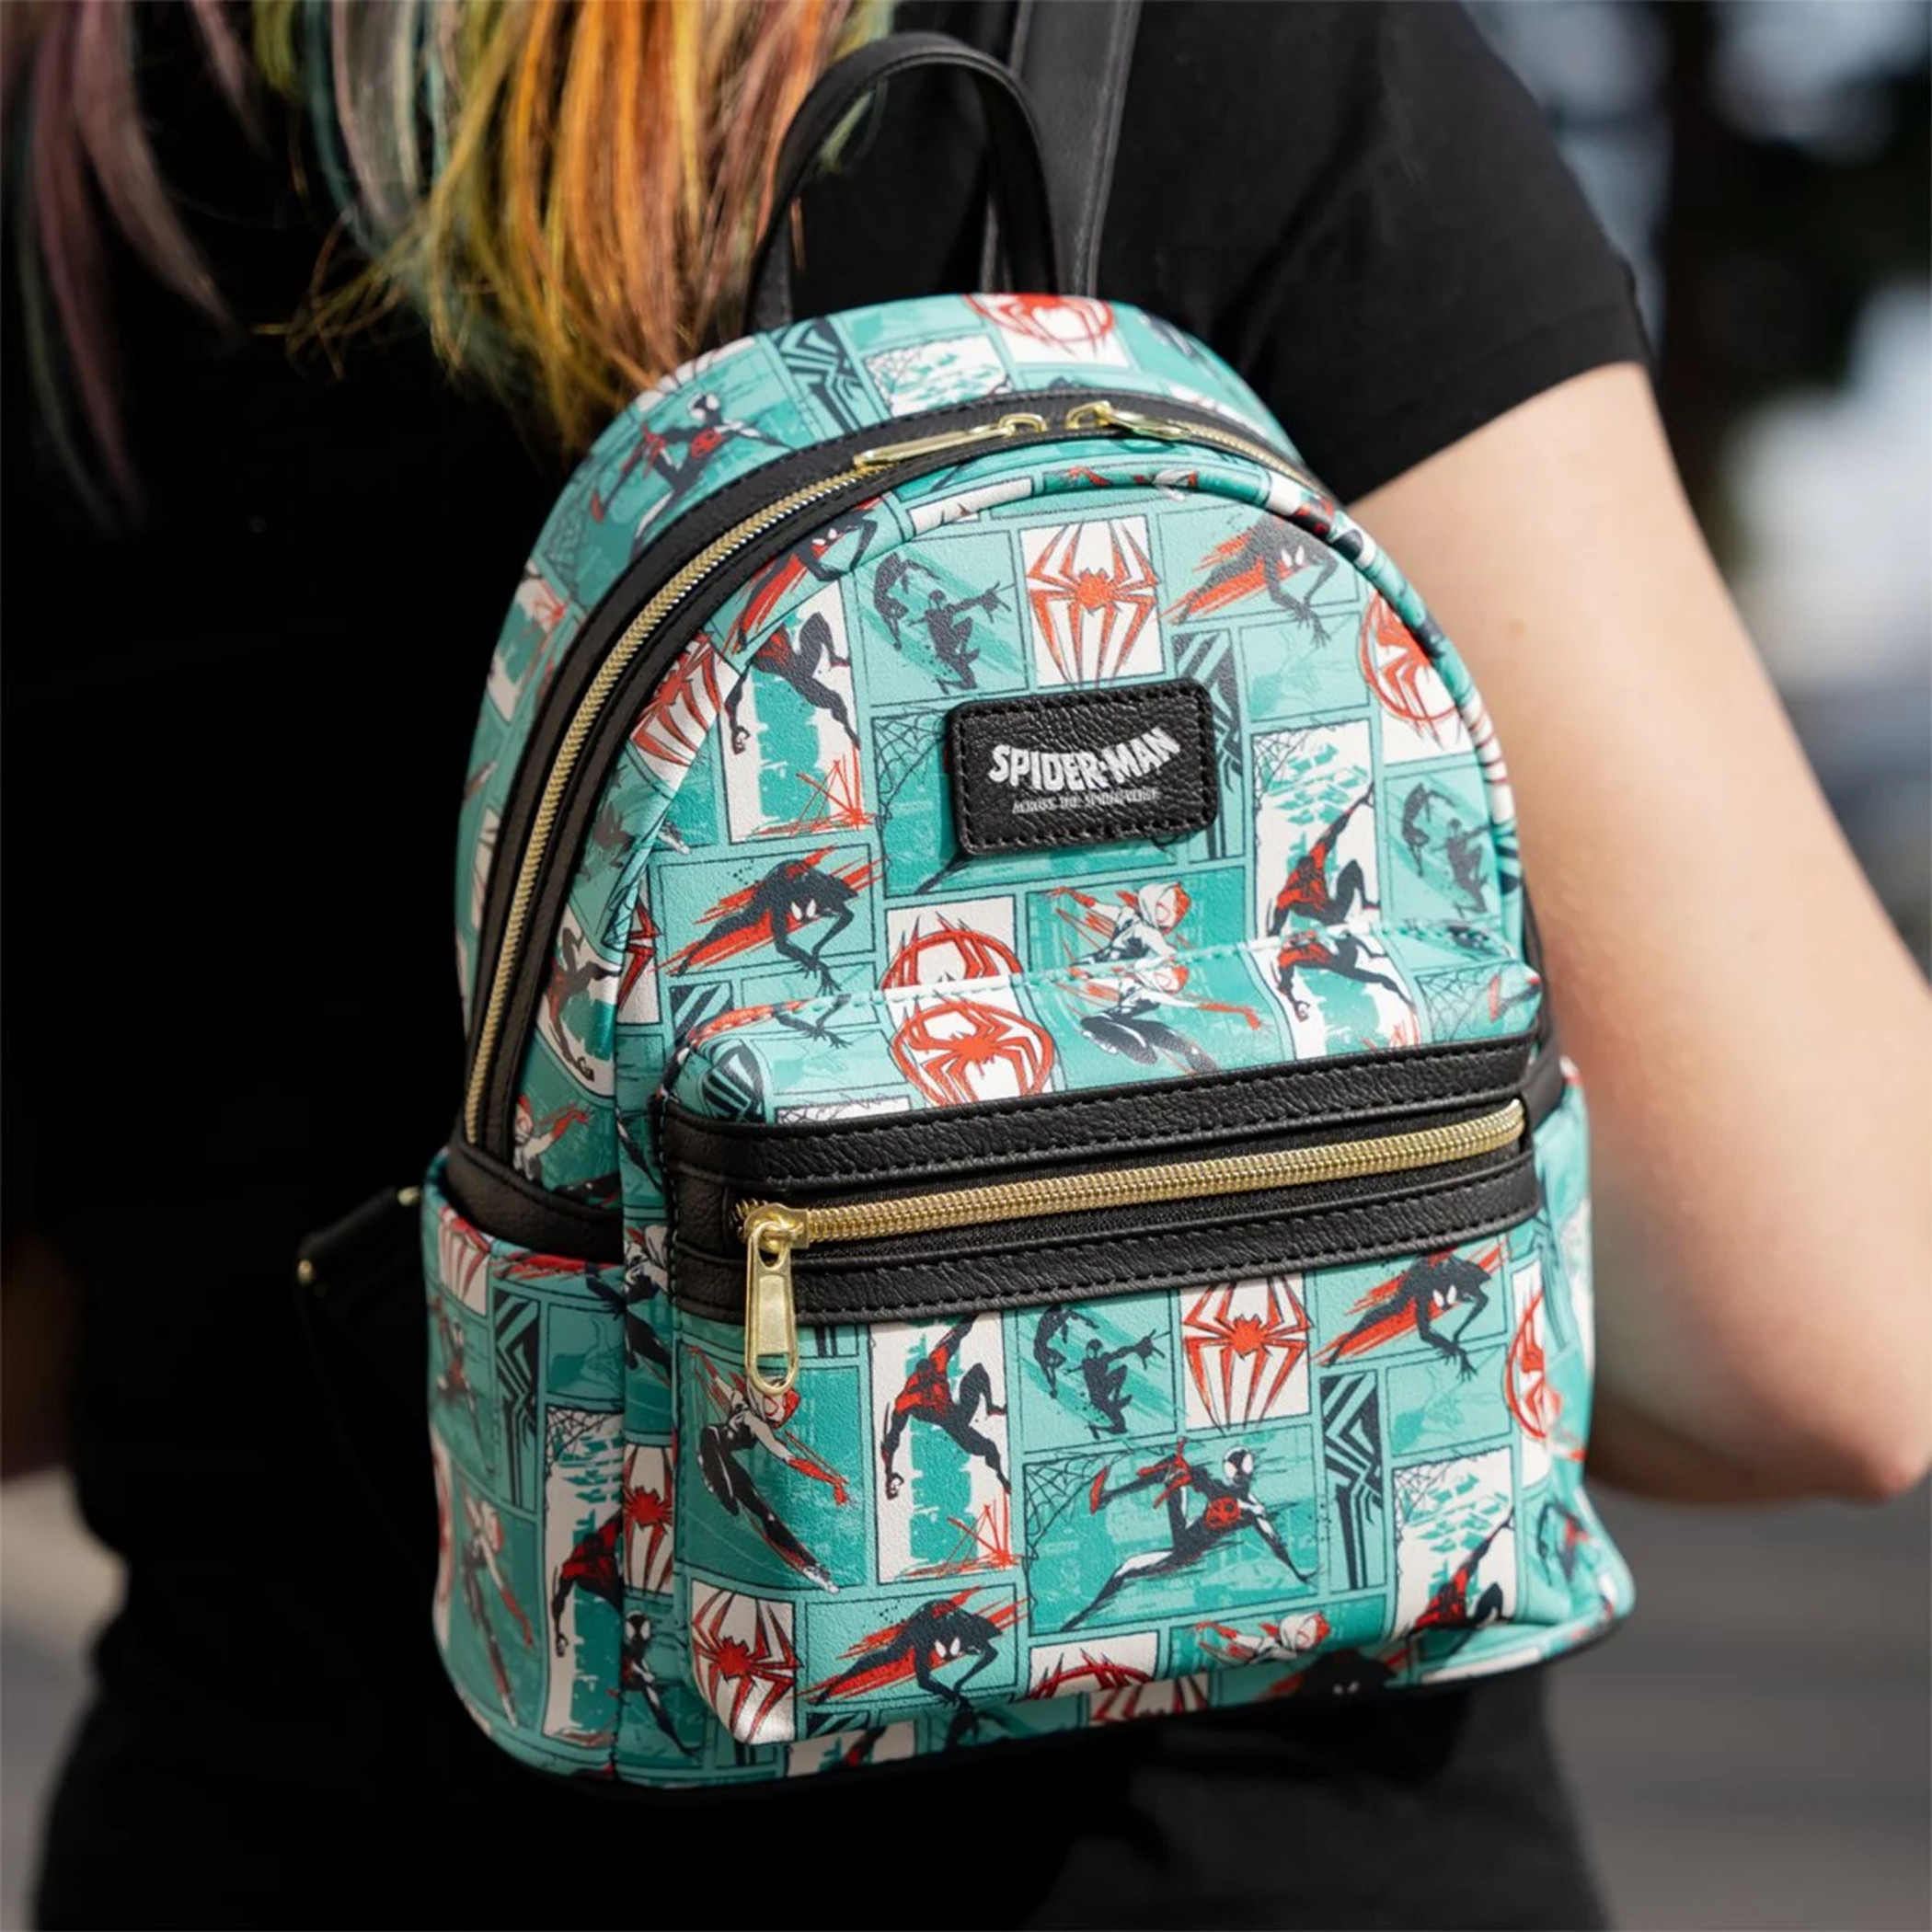 Spider-Man Across the Spider-Verse Mini-Backpack By Loungefly